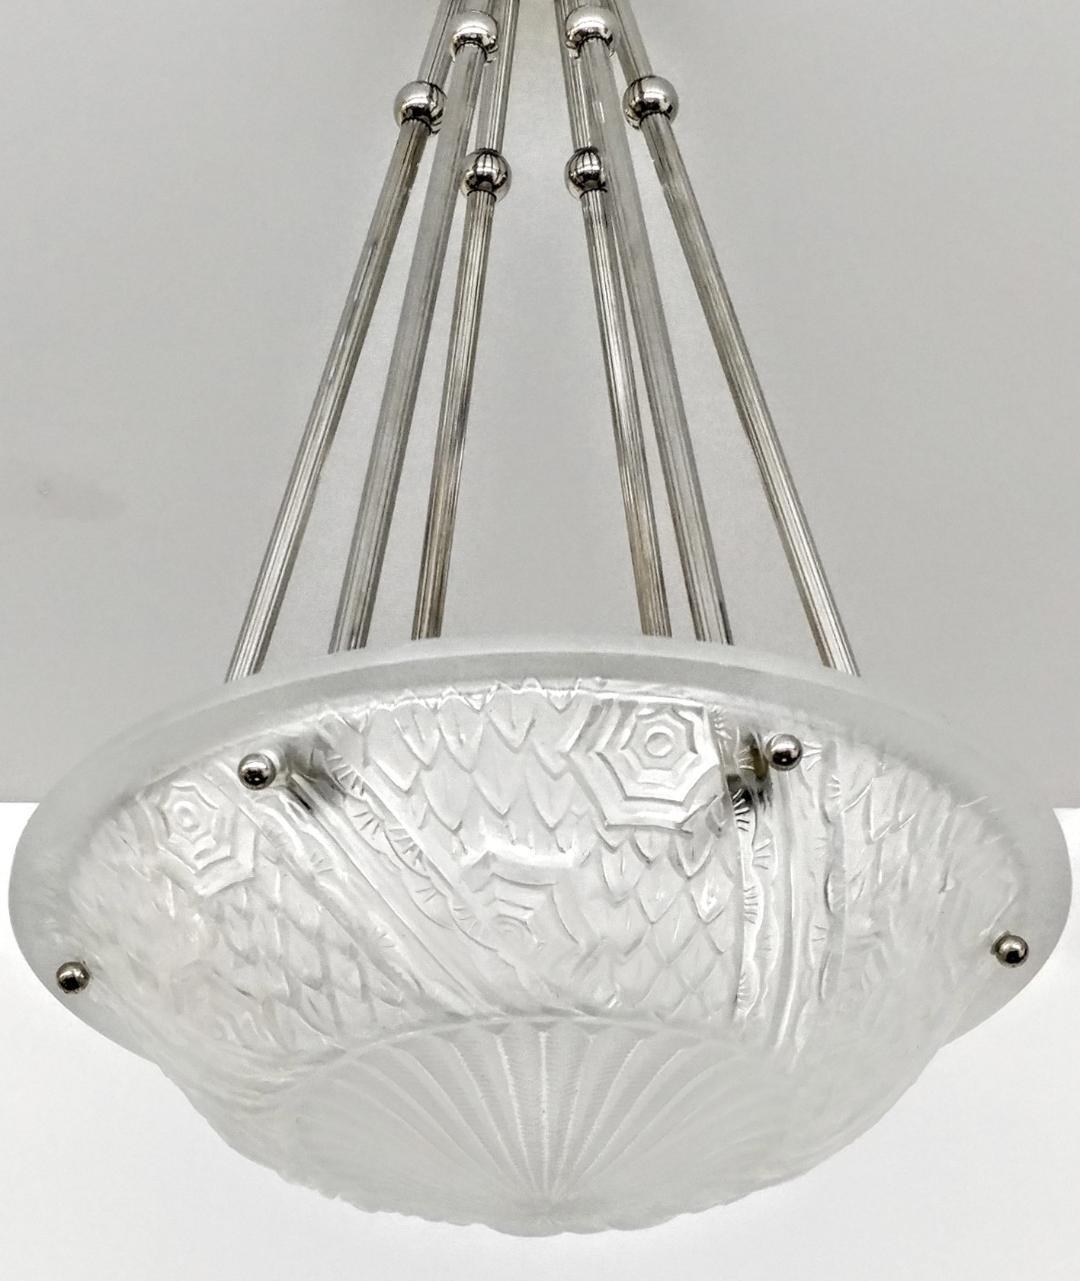 A French Art Deco pendant chandelier by the French artist “Schneider“. Clear frosted molded glass shades with intricate flowers and geometric polished motif details held by six ribbed rods with a dash of decorative balls extending from a matching